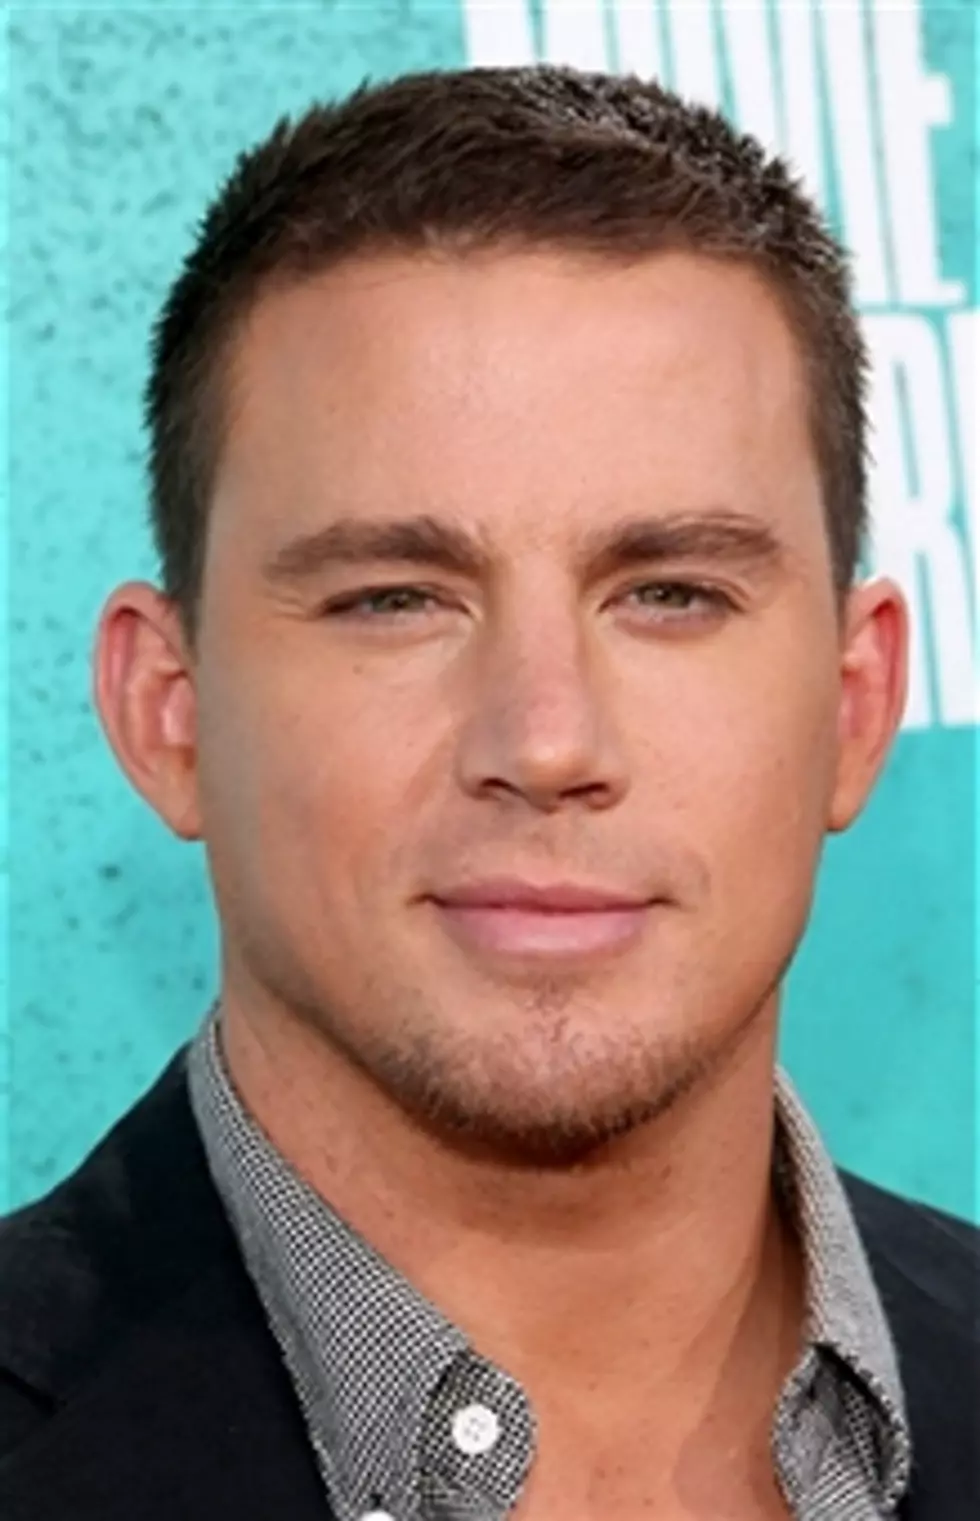 Teen with Stage 4 Cancer Gets Channing Tatum Kiss!